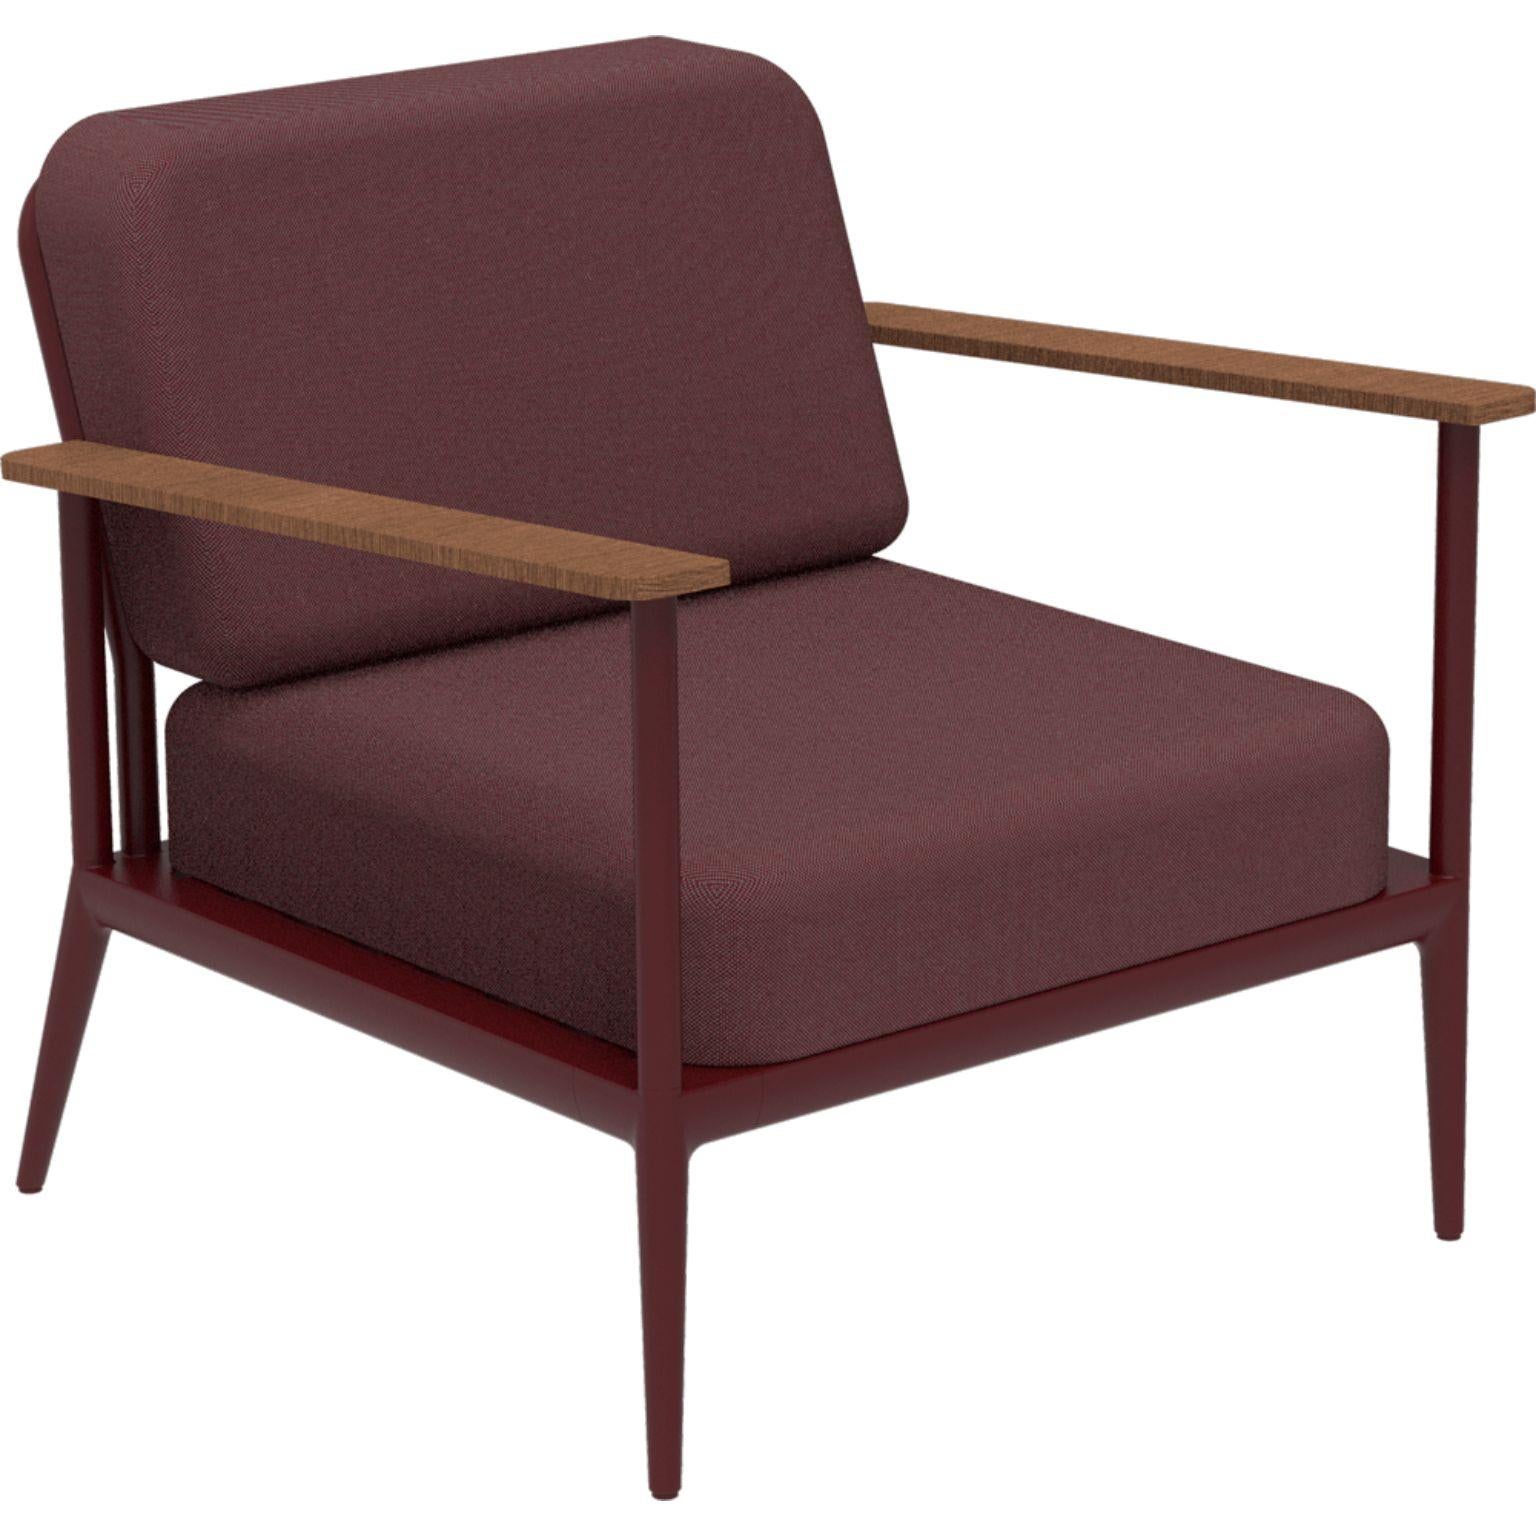 Nature Burgundy longue chair by MOWEE
Dimensions: D85 x W83 x H81 cm (seat height 42 cm).
Material: Aluminum, upholstery and Iroko Wood.
Weight: 20 kg.
Also available in different colors and finishes.

An unmistakable collection for its beauty